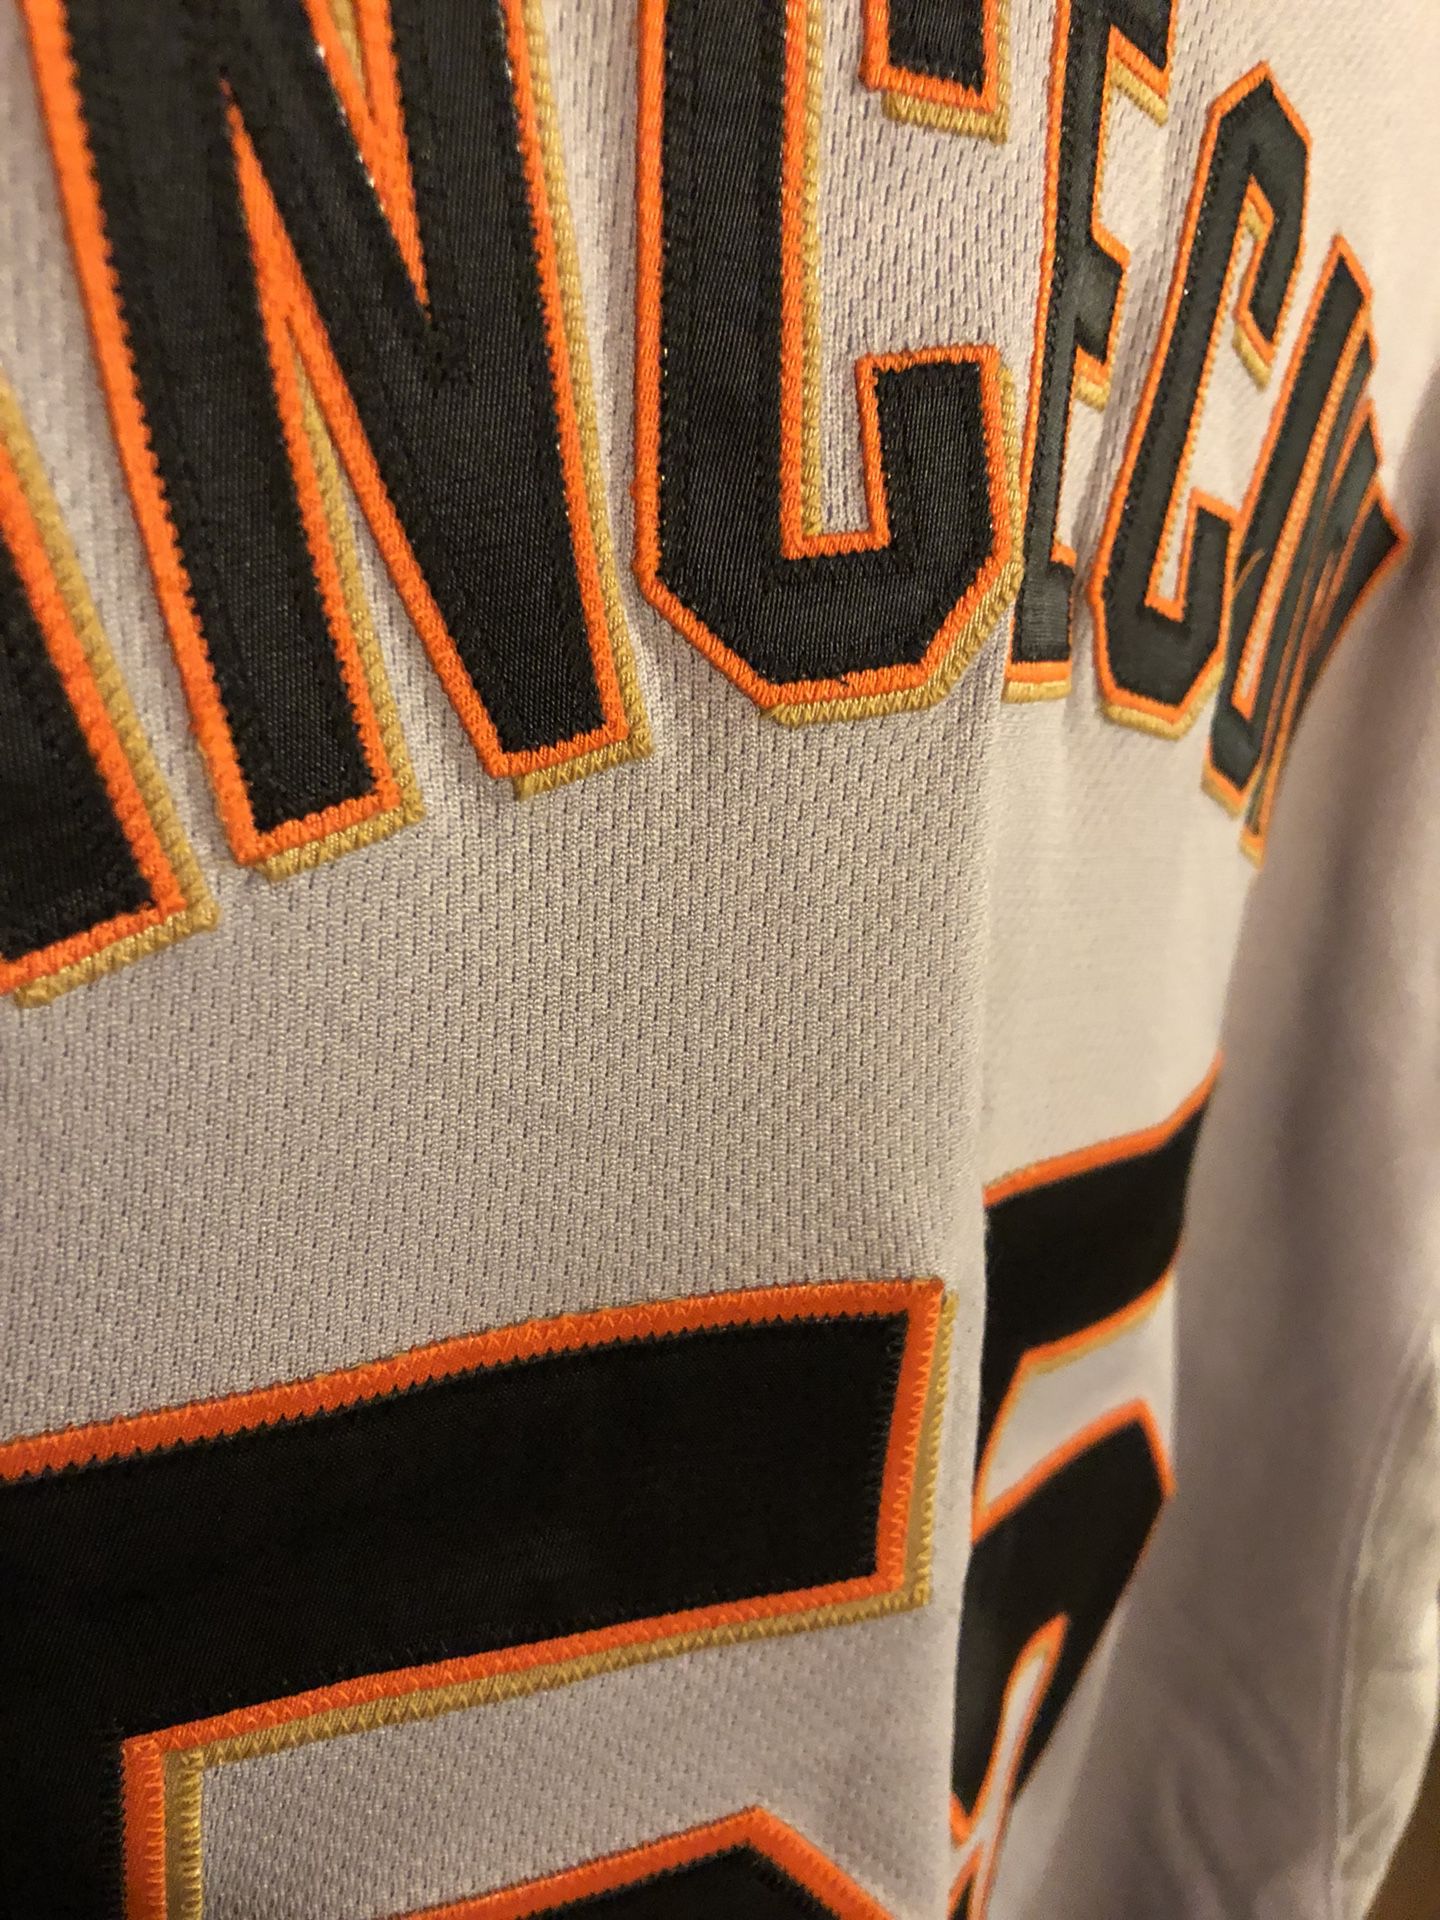 Majestic, Shirts, Rare Tim Lincecum 21 Sf Giants Player Design Jersey Cy  Young Winner Majestic